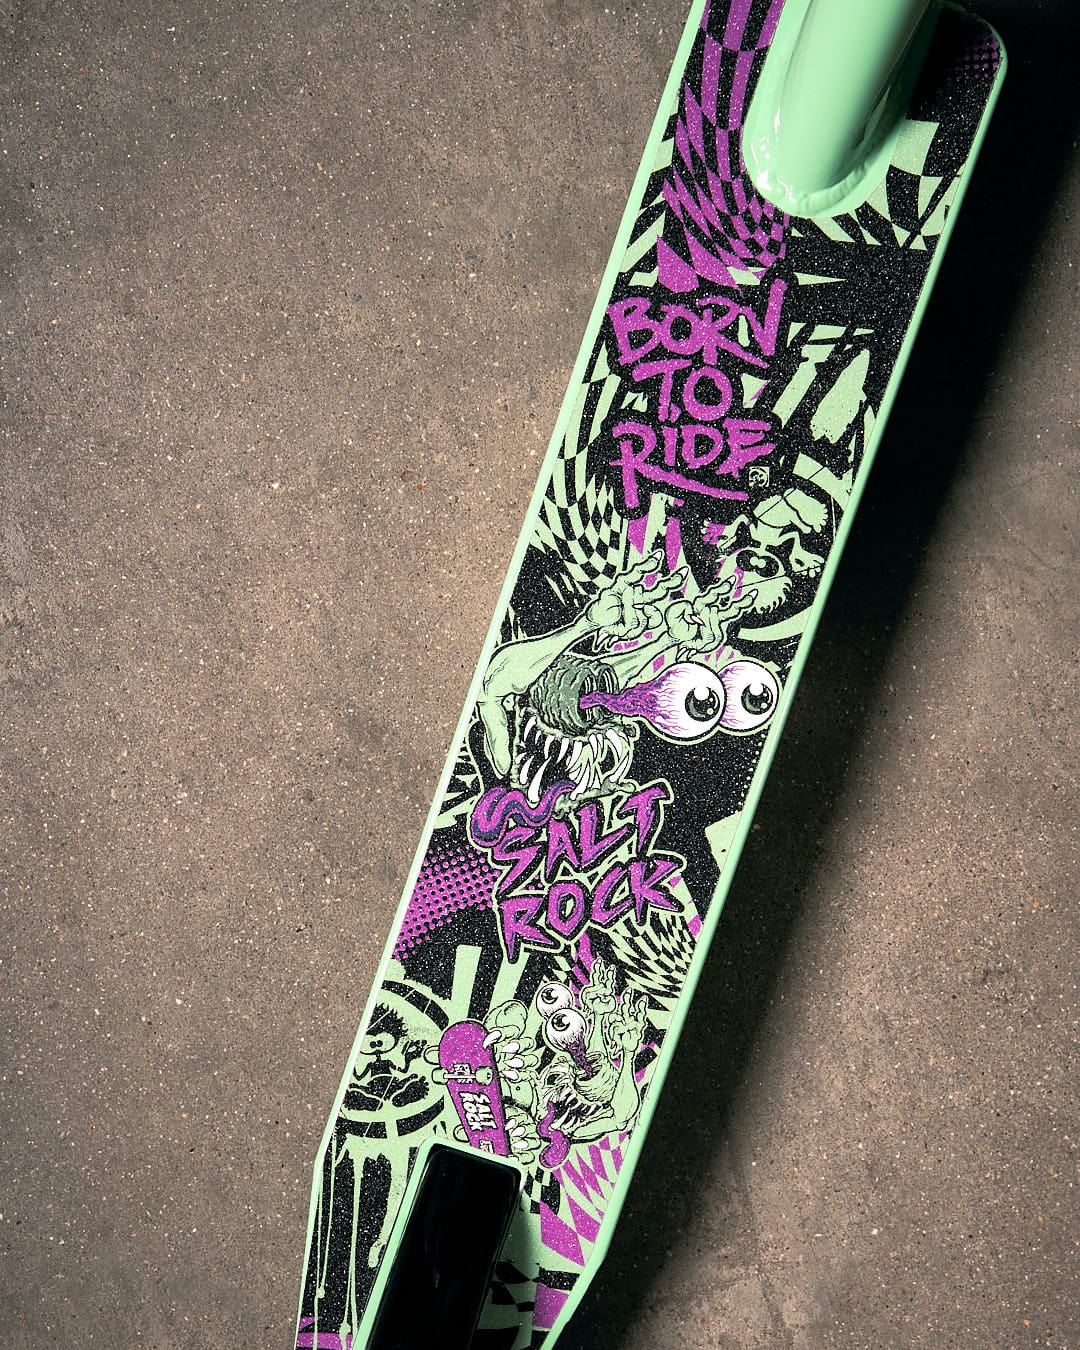 A green and purple Creeper Stunt Scooter - Turquoise by Saltrock with graffiti on it.